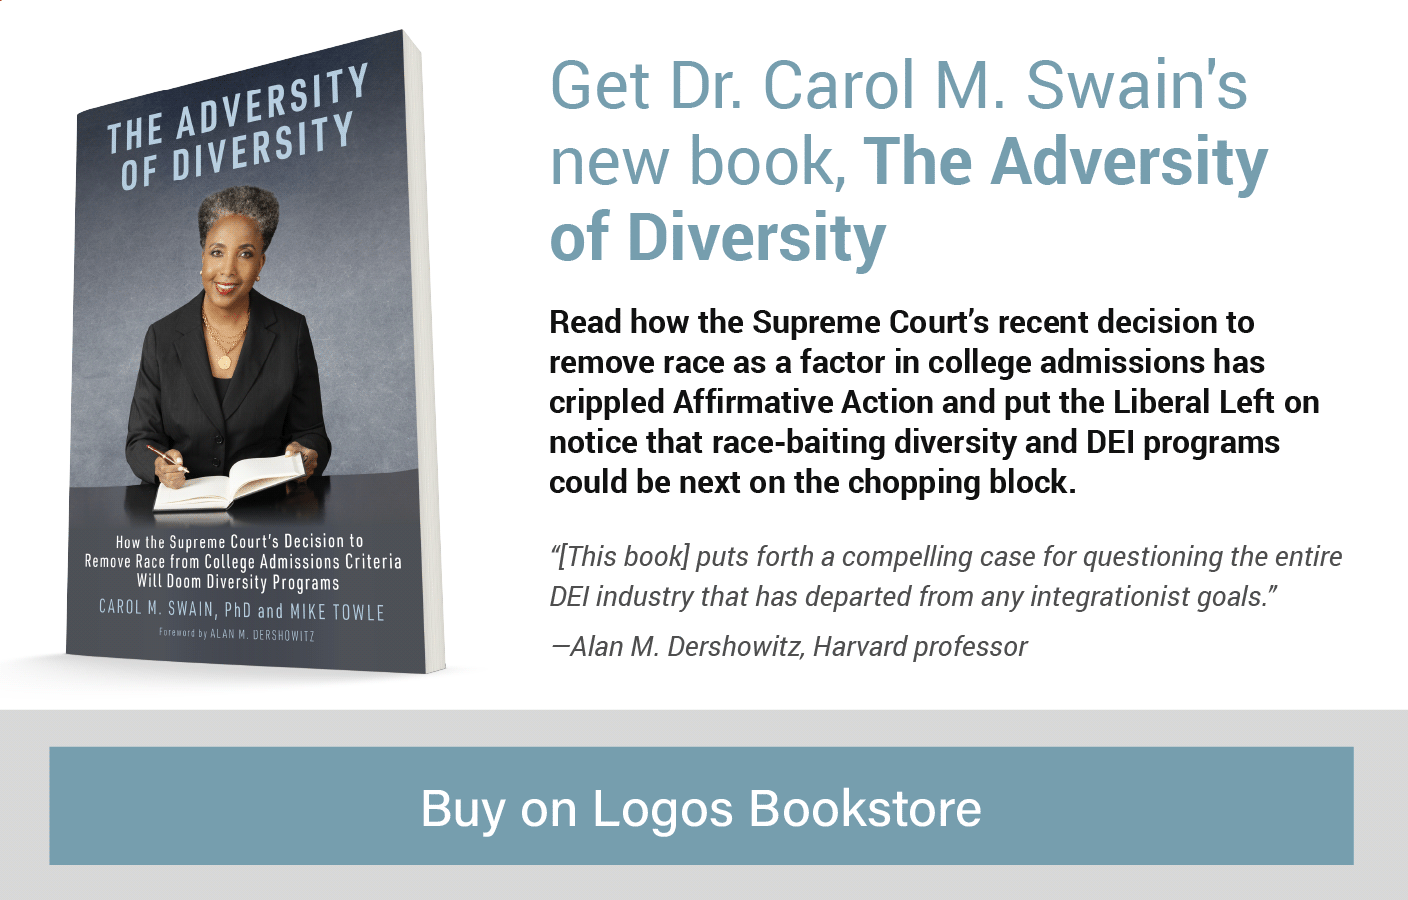 the adversity of diversity, buy book on logos bookstore